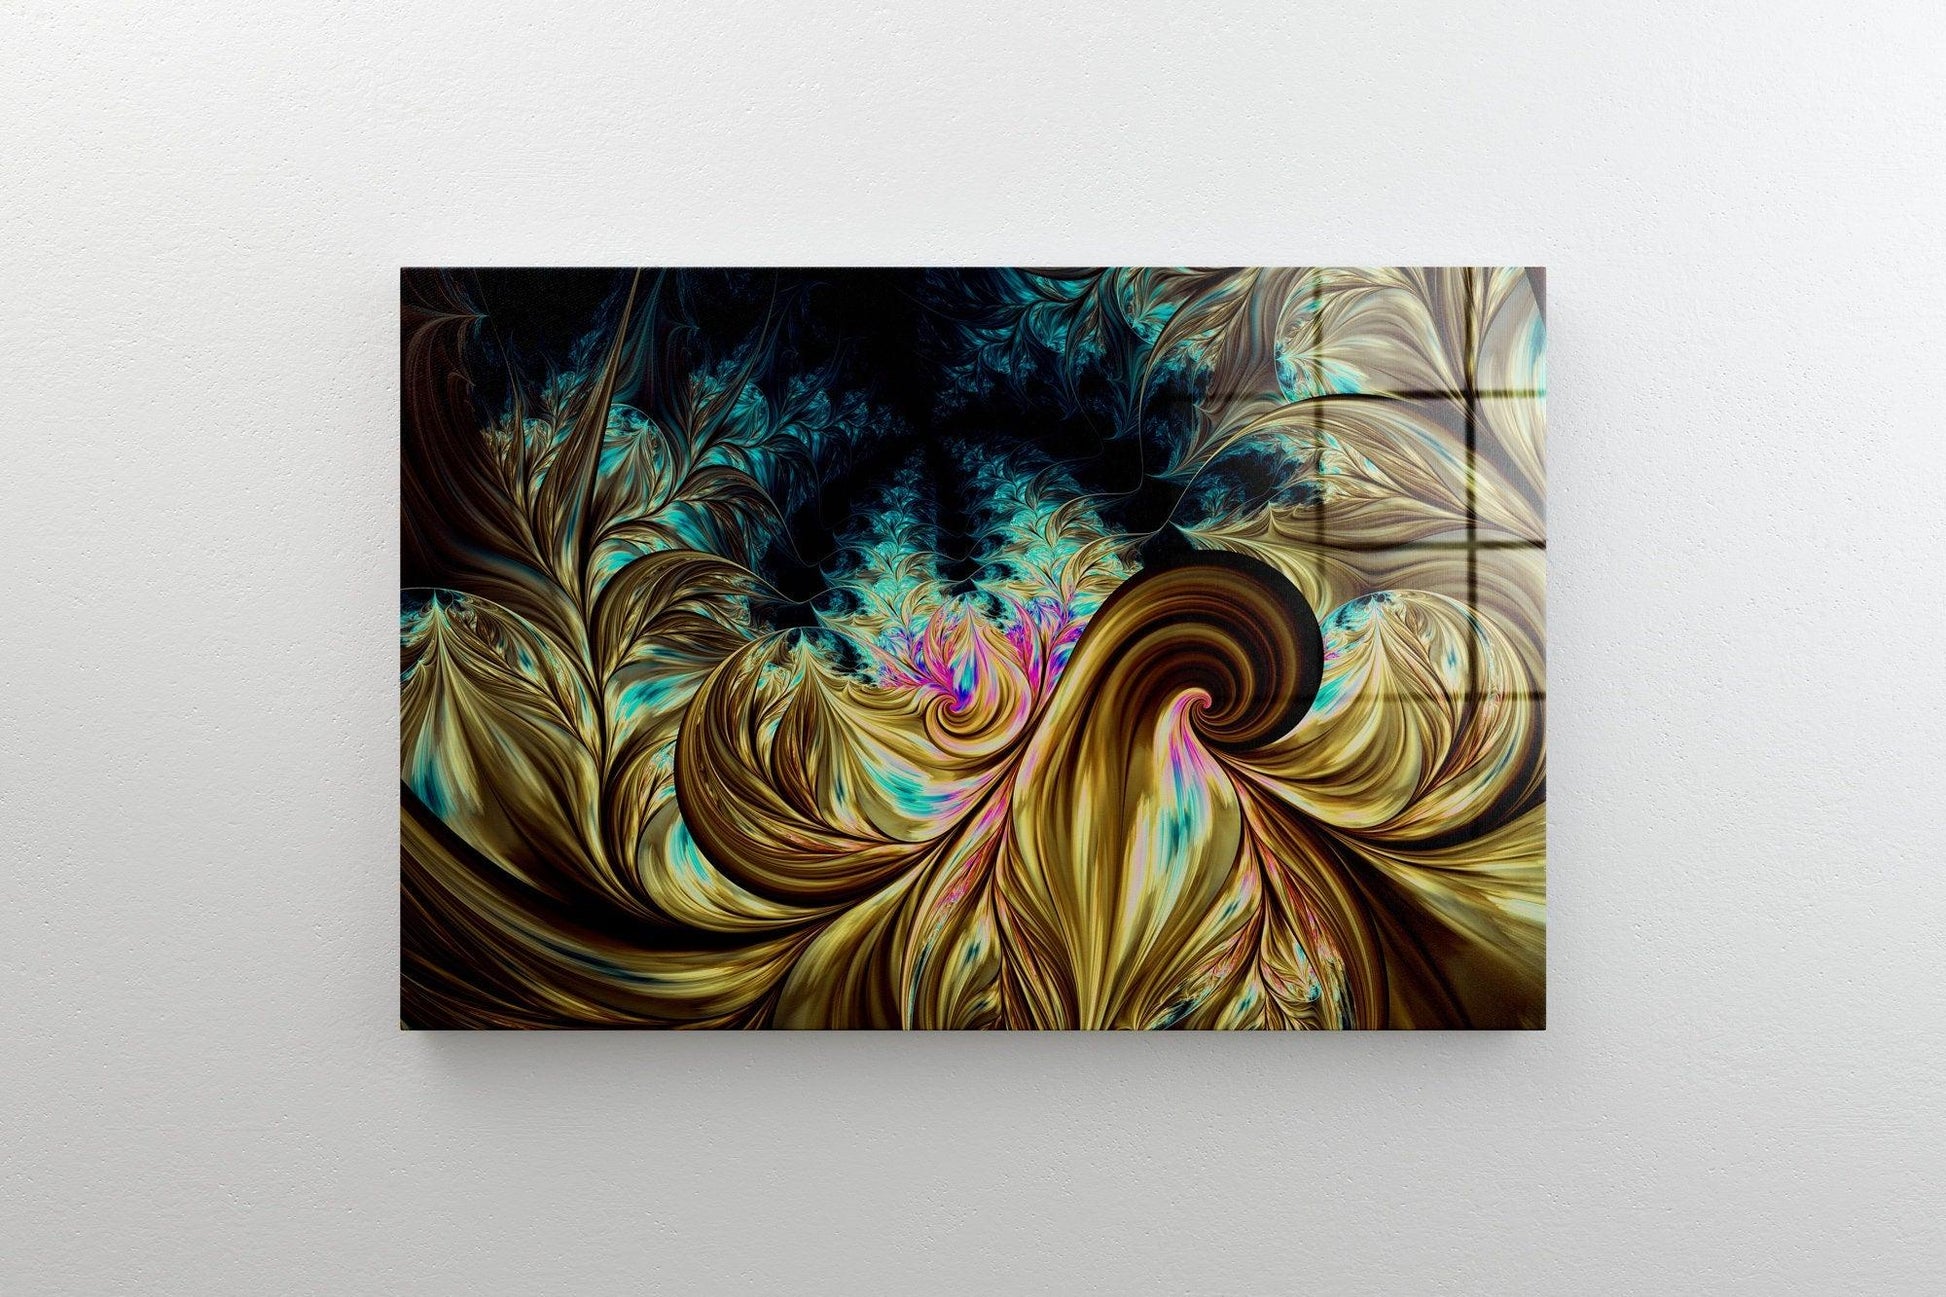 Stained Decor Wall Art| fractal glass wall art, Wall Decor Living Room Modern, Extra Large Wall Art, Decor for Bedroom, Tempered Glass Art